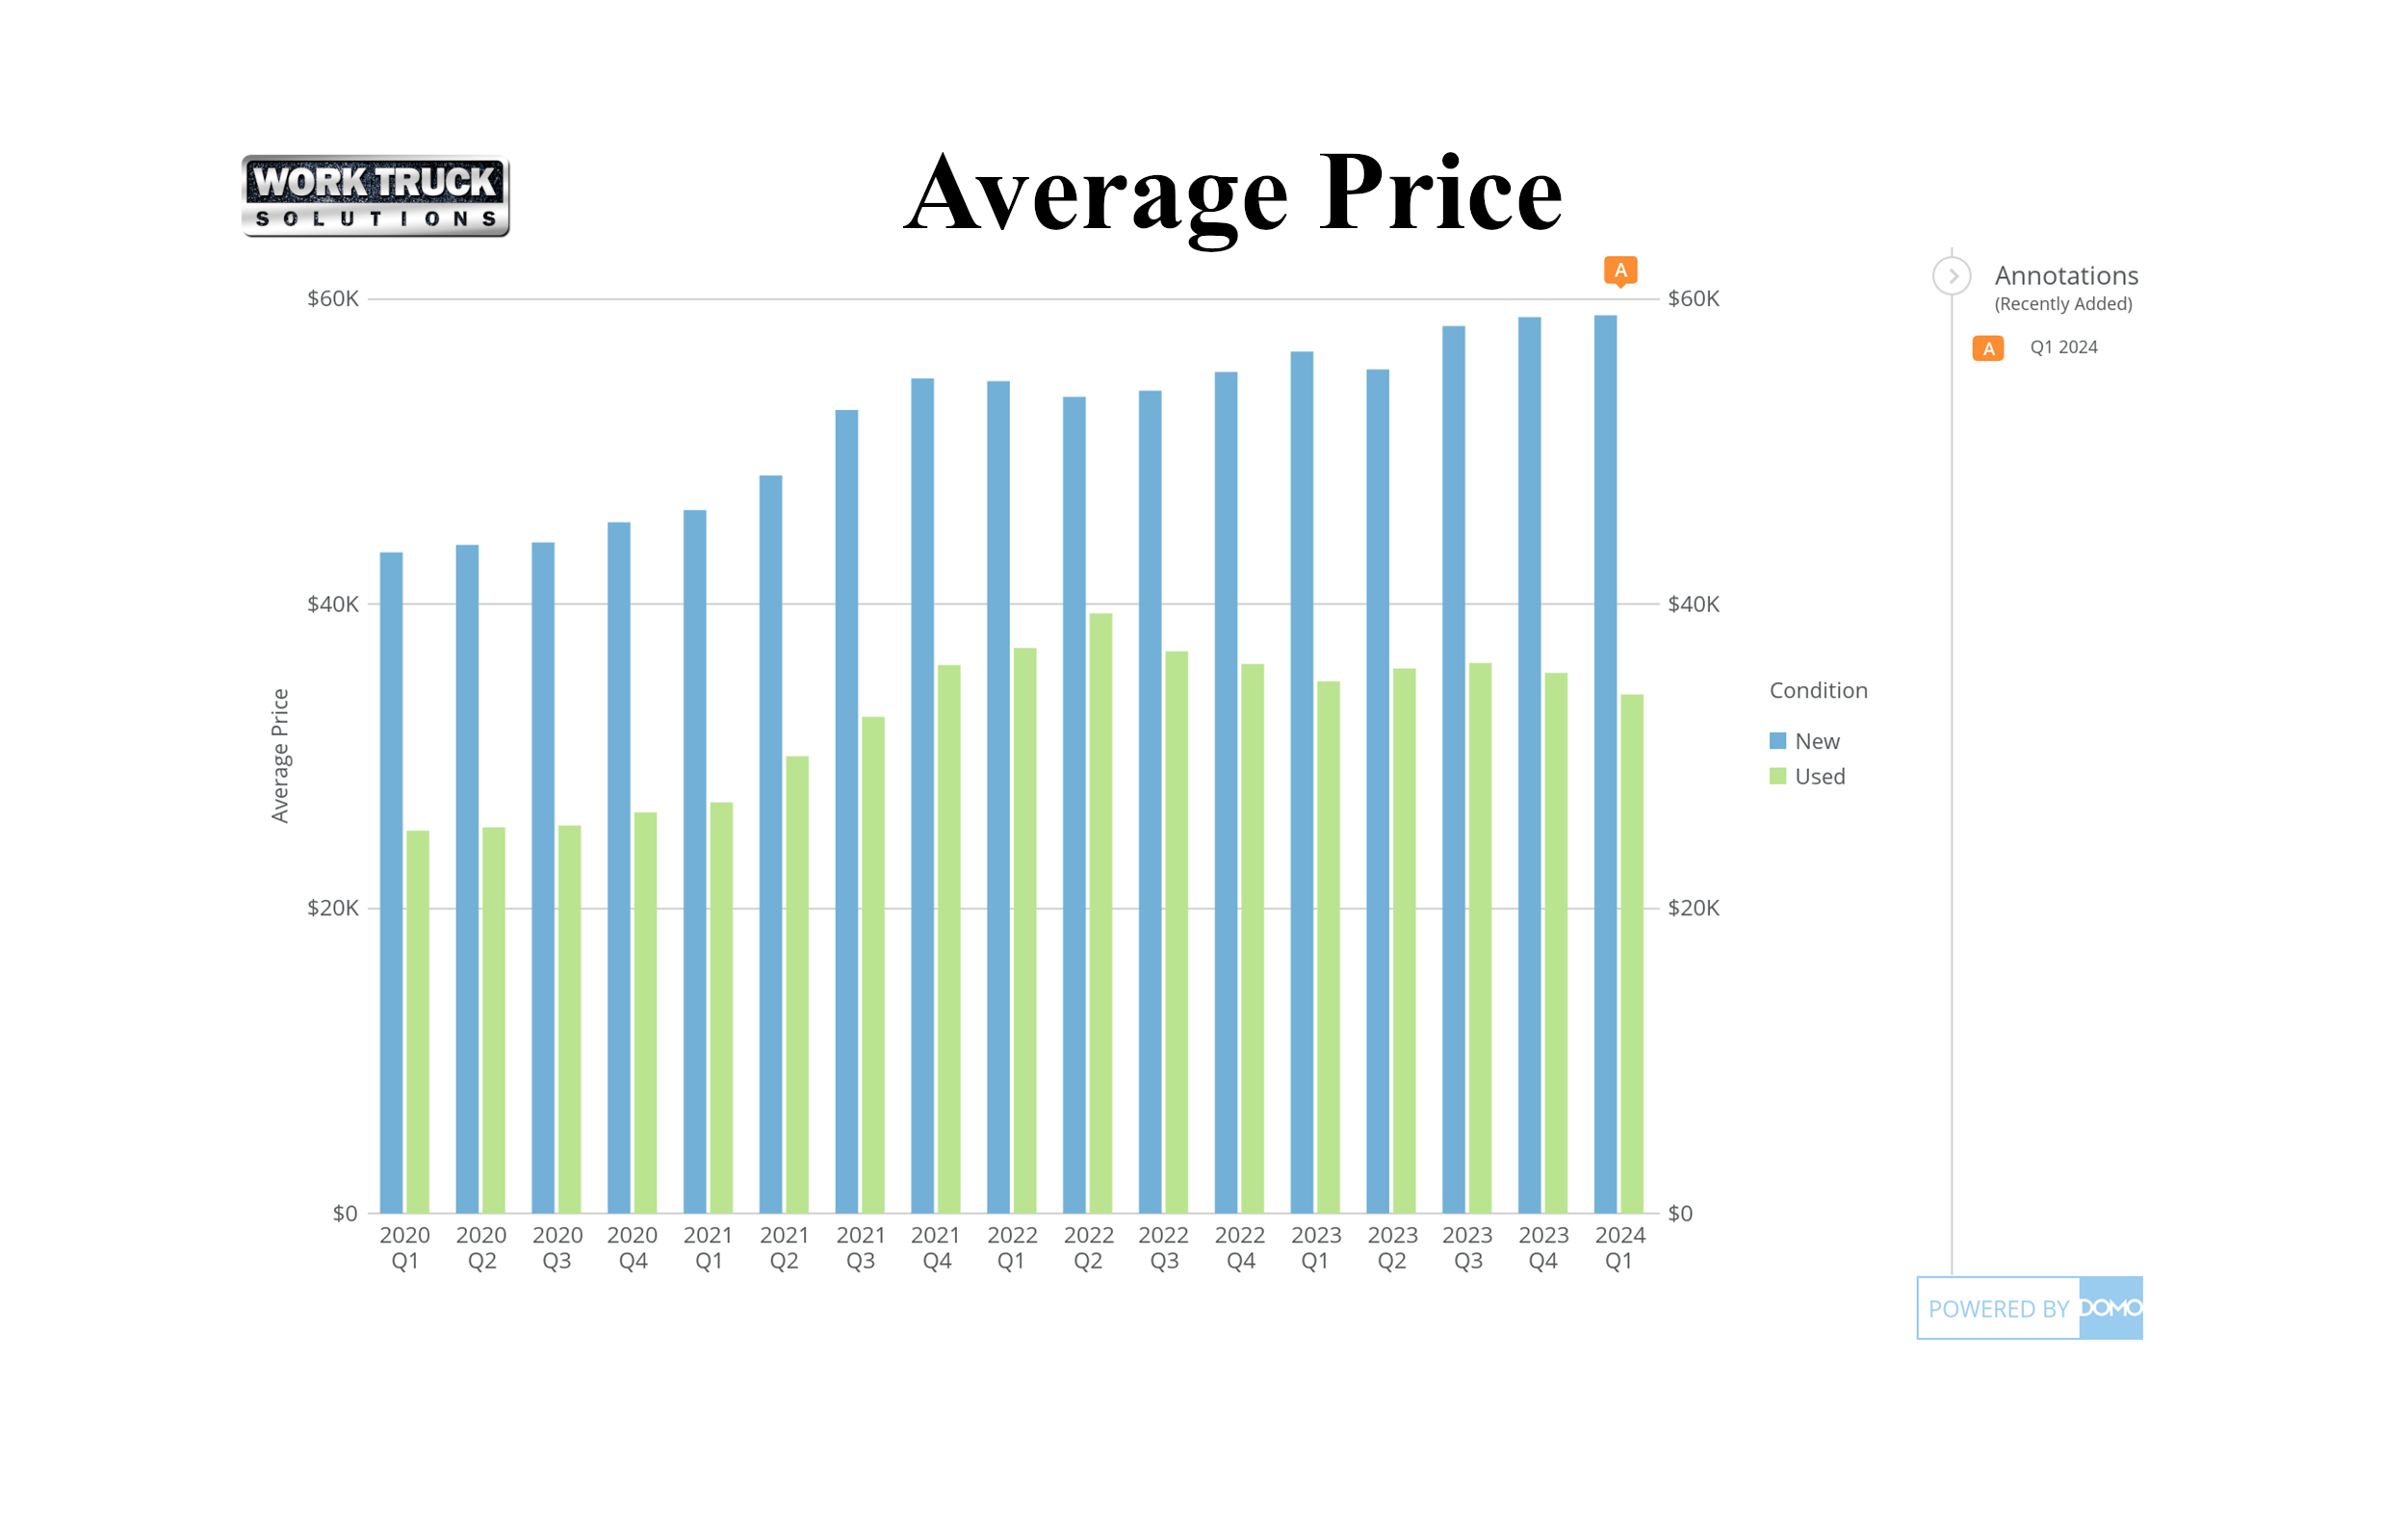 While almost flat QoQ, prices for new commercial vehicles are at their highest average figure to date, nearing $60,000.